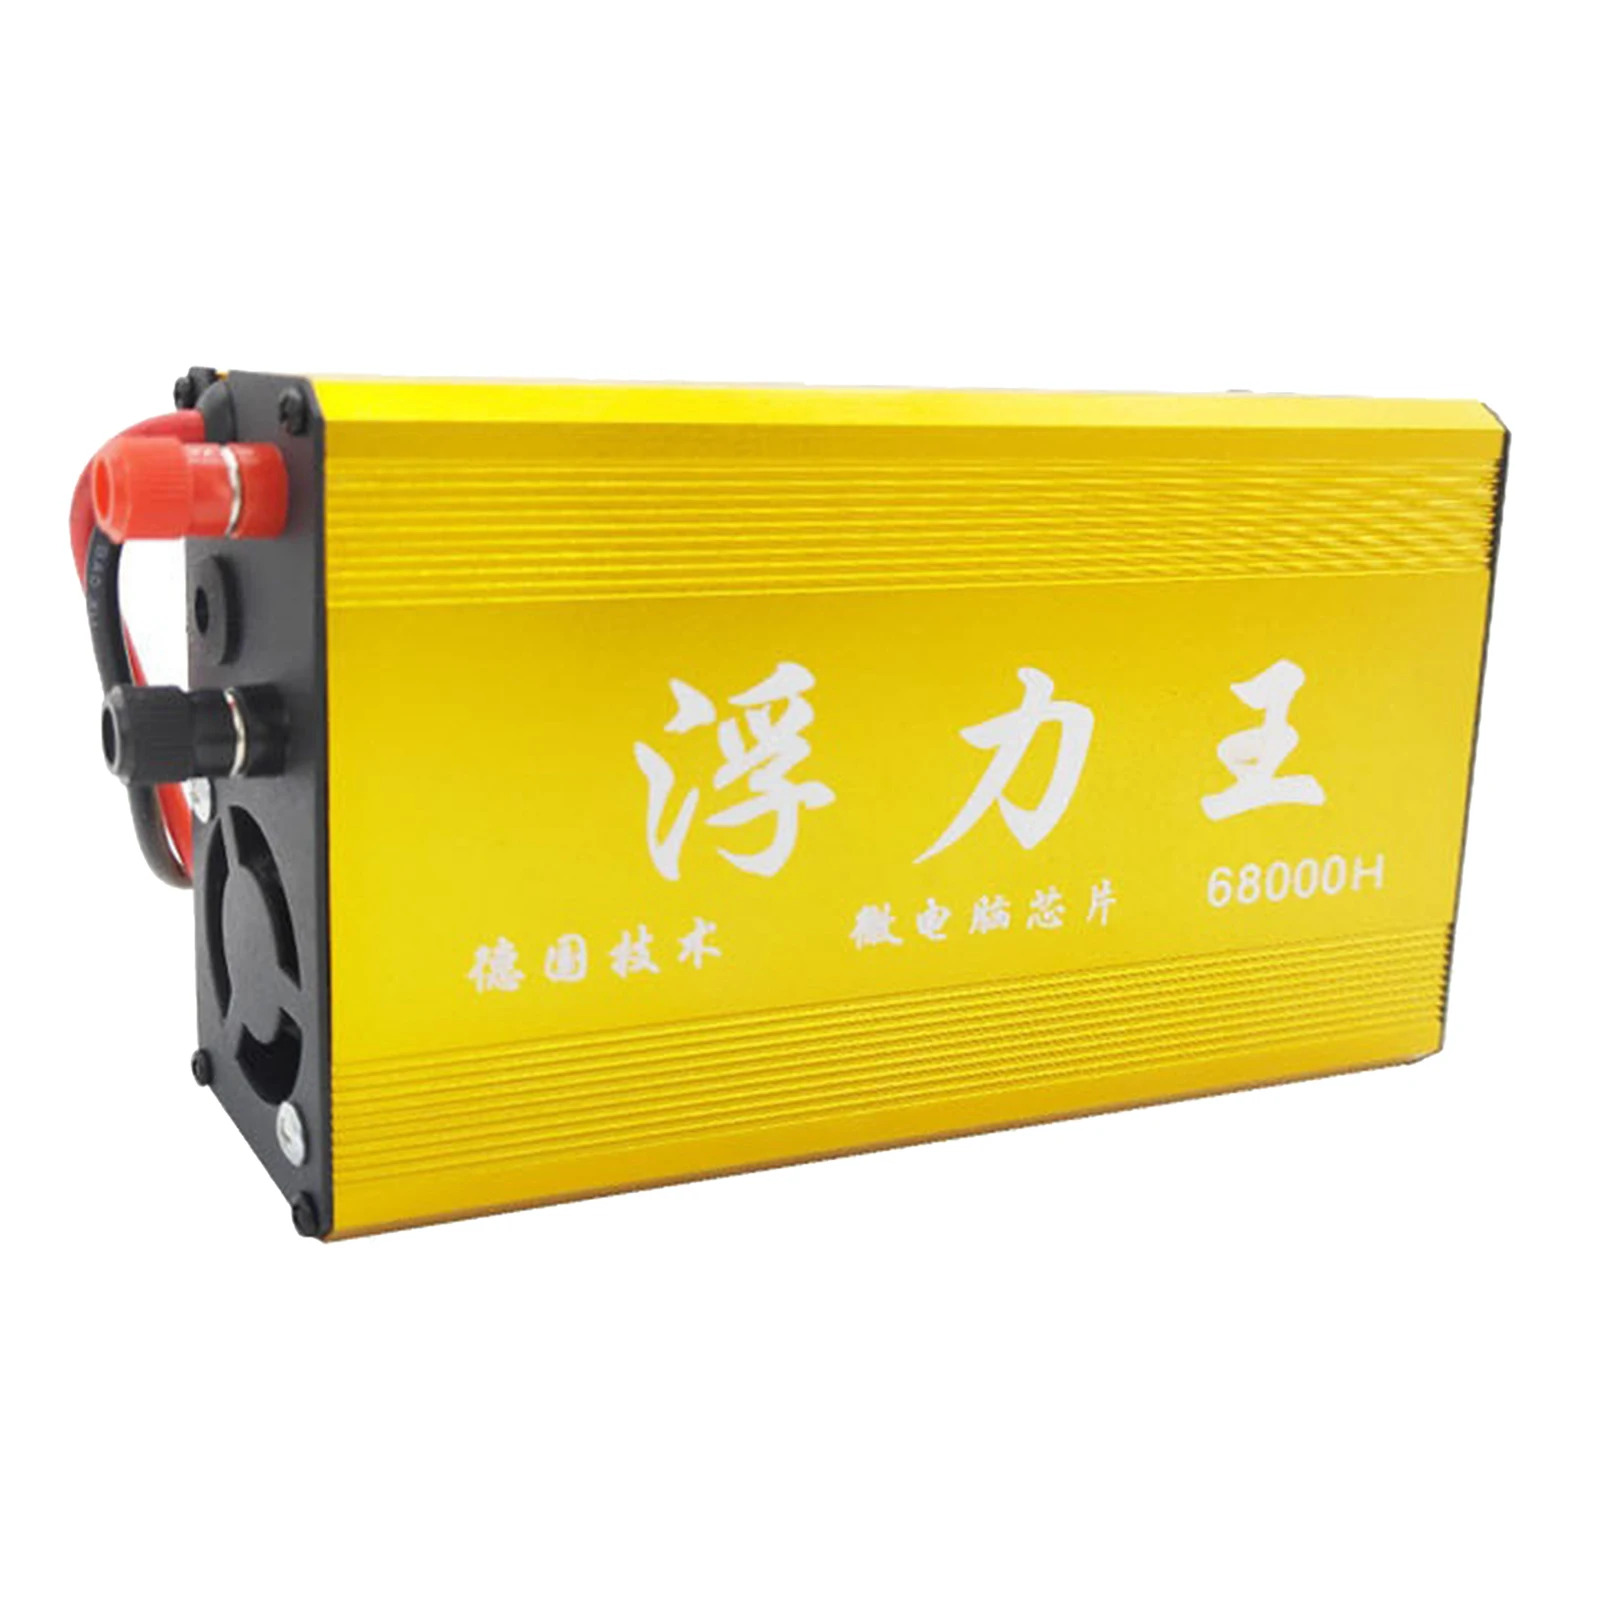 68000W DC 12V Ultrasonic Inverter Electronic  High Power Sine Wave Fishing Machine Safe Inverter Device Security Protector